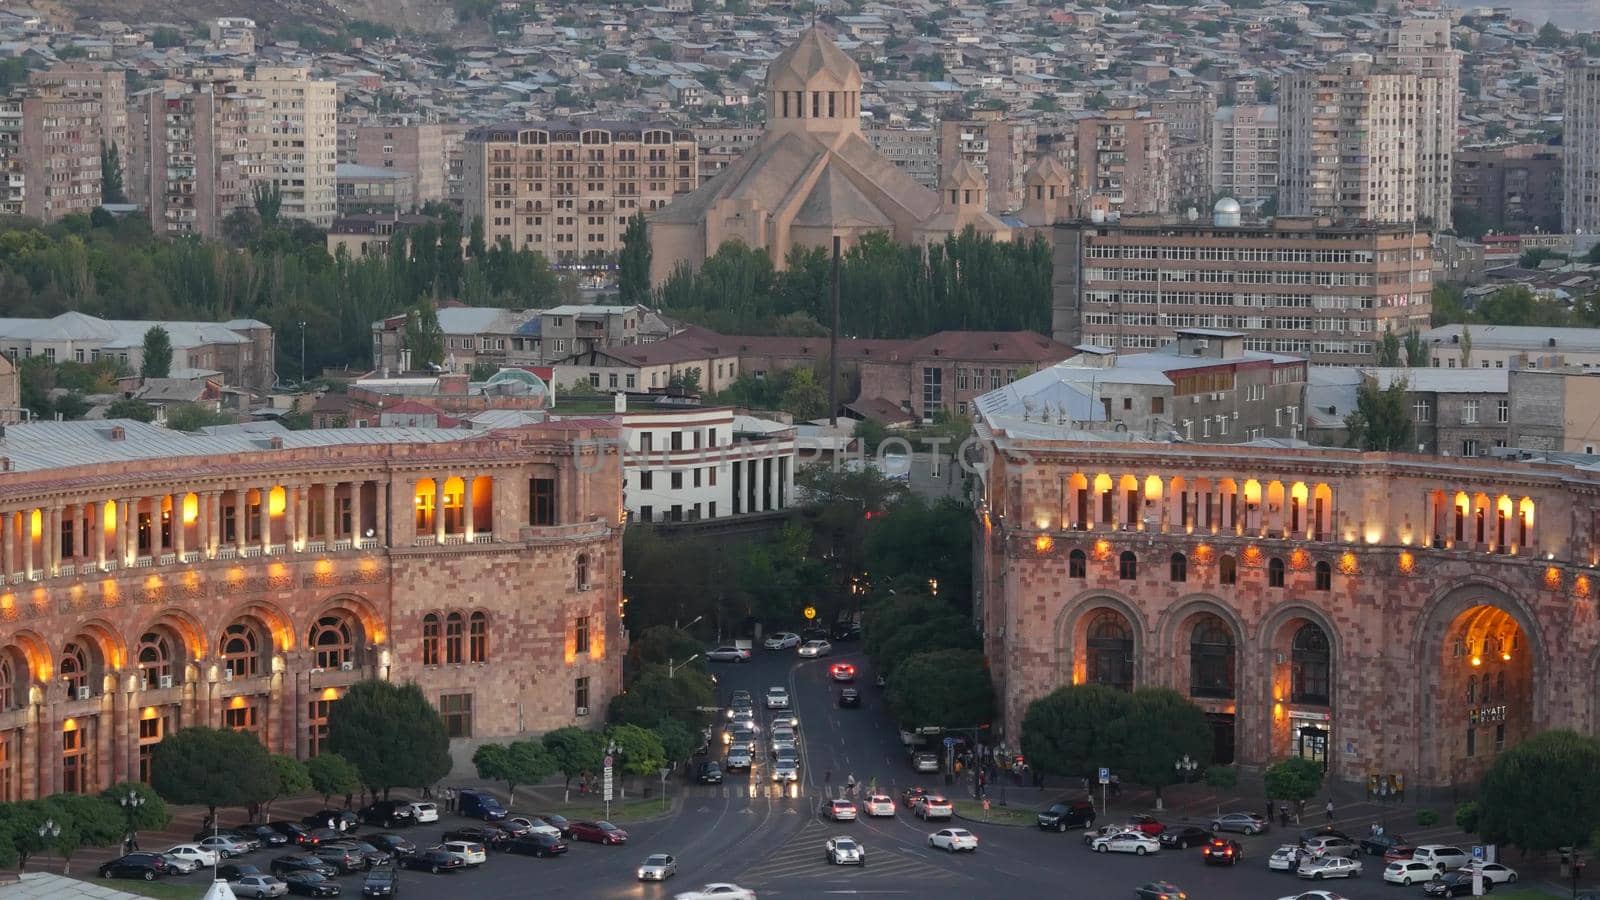 YEREVAN, ARMENIA, CAUCASUS, 28 AUGUST 2019 Saint Gregory the Illuminator Cathedral, Central Republic Square, Kentron, caucasian armenian capital, soviet architectural heritage, downtown classical view by DogoraSun